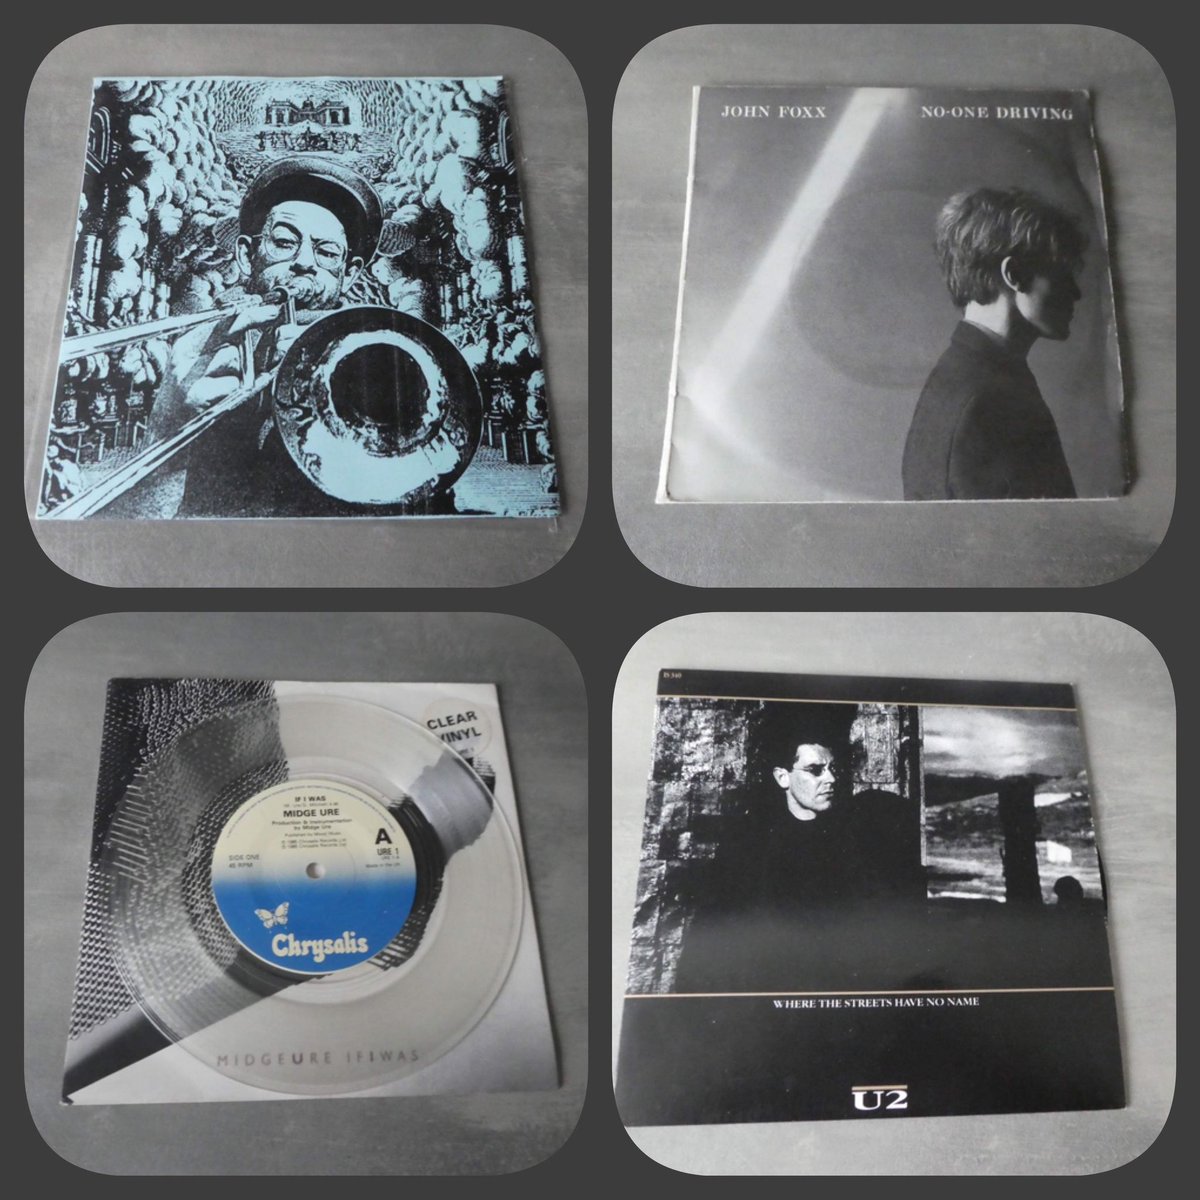 More new wave singles listed today on the fbrecords eBay page here’s 4/20 loads more records and cds on there have a butchers #jowehead #johnfoxx #midgeure #u2 #fbrecords #punk #newwave #rebellionfestival #ebayseller #ebay #discogs #fbrecordsblackpool #instamusic #instapic